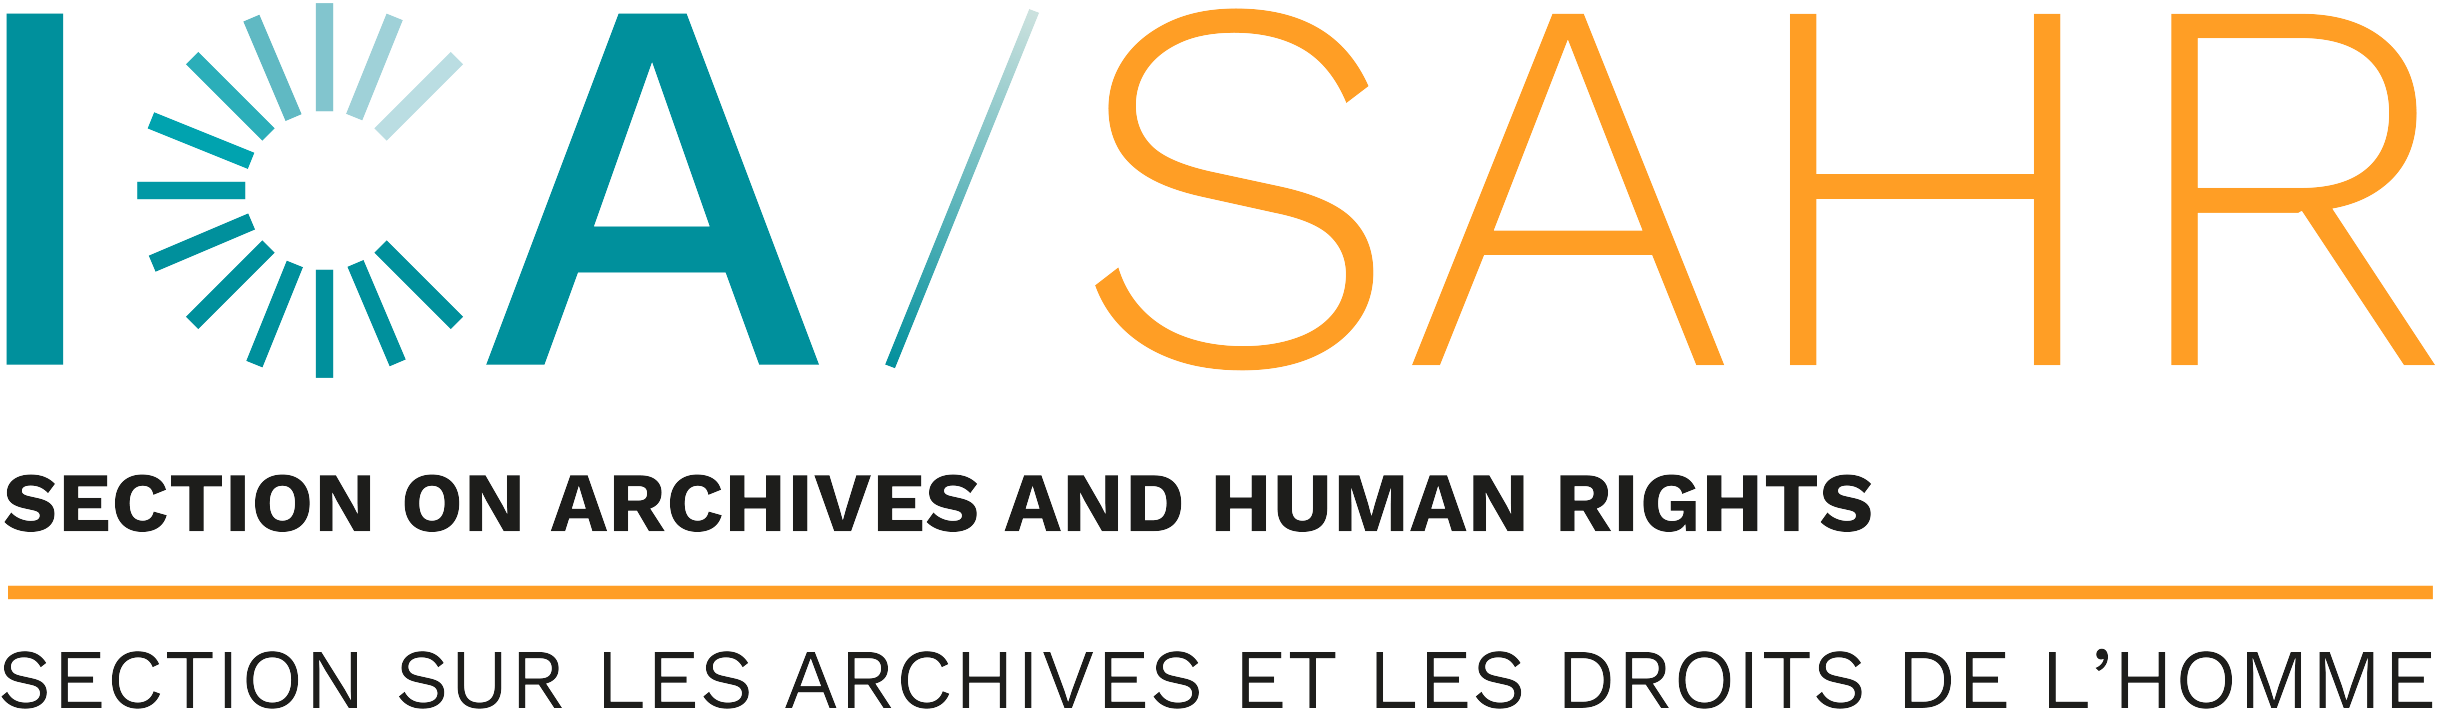 Section on Archives and Human Rights (SAHR)